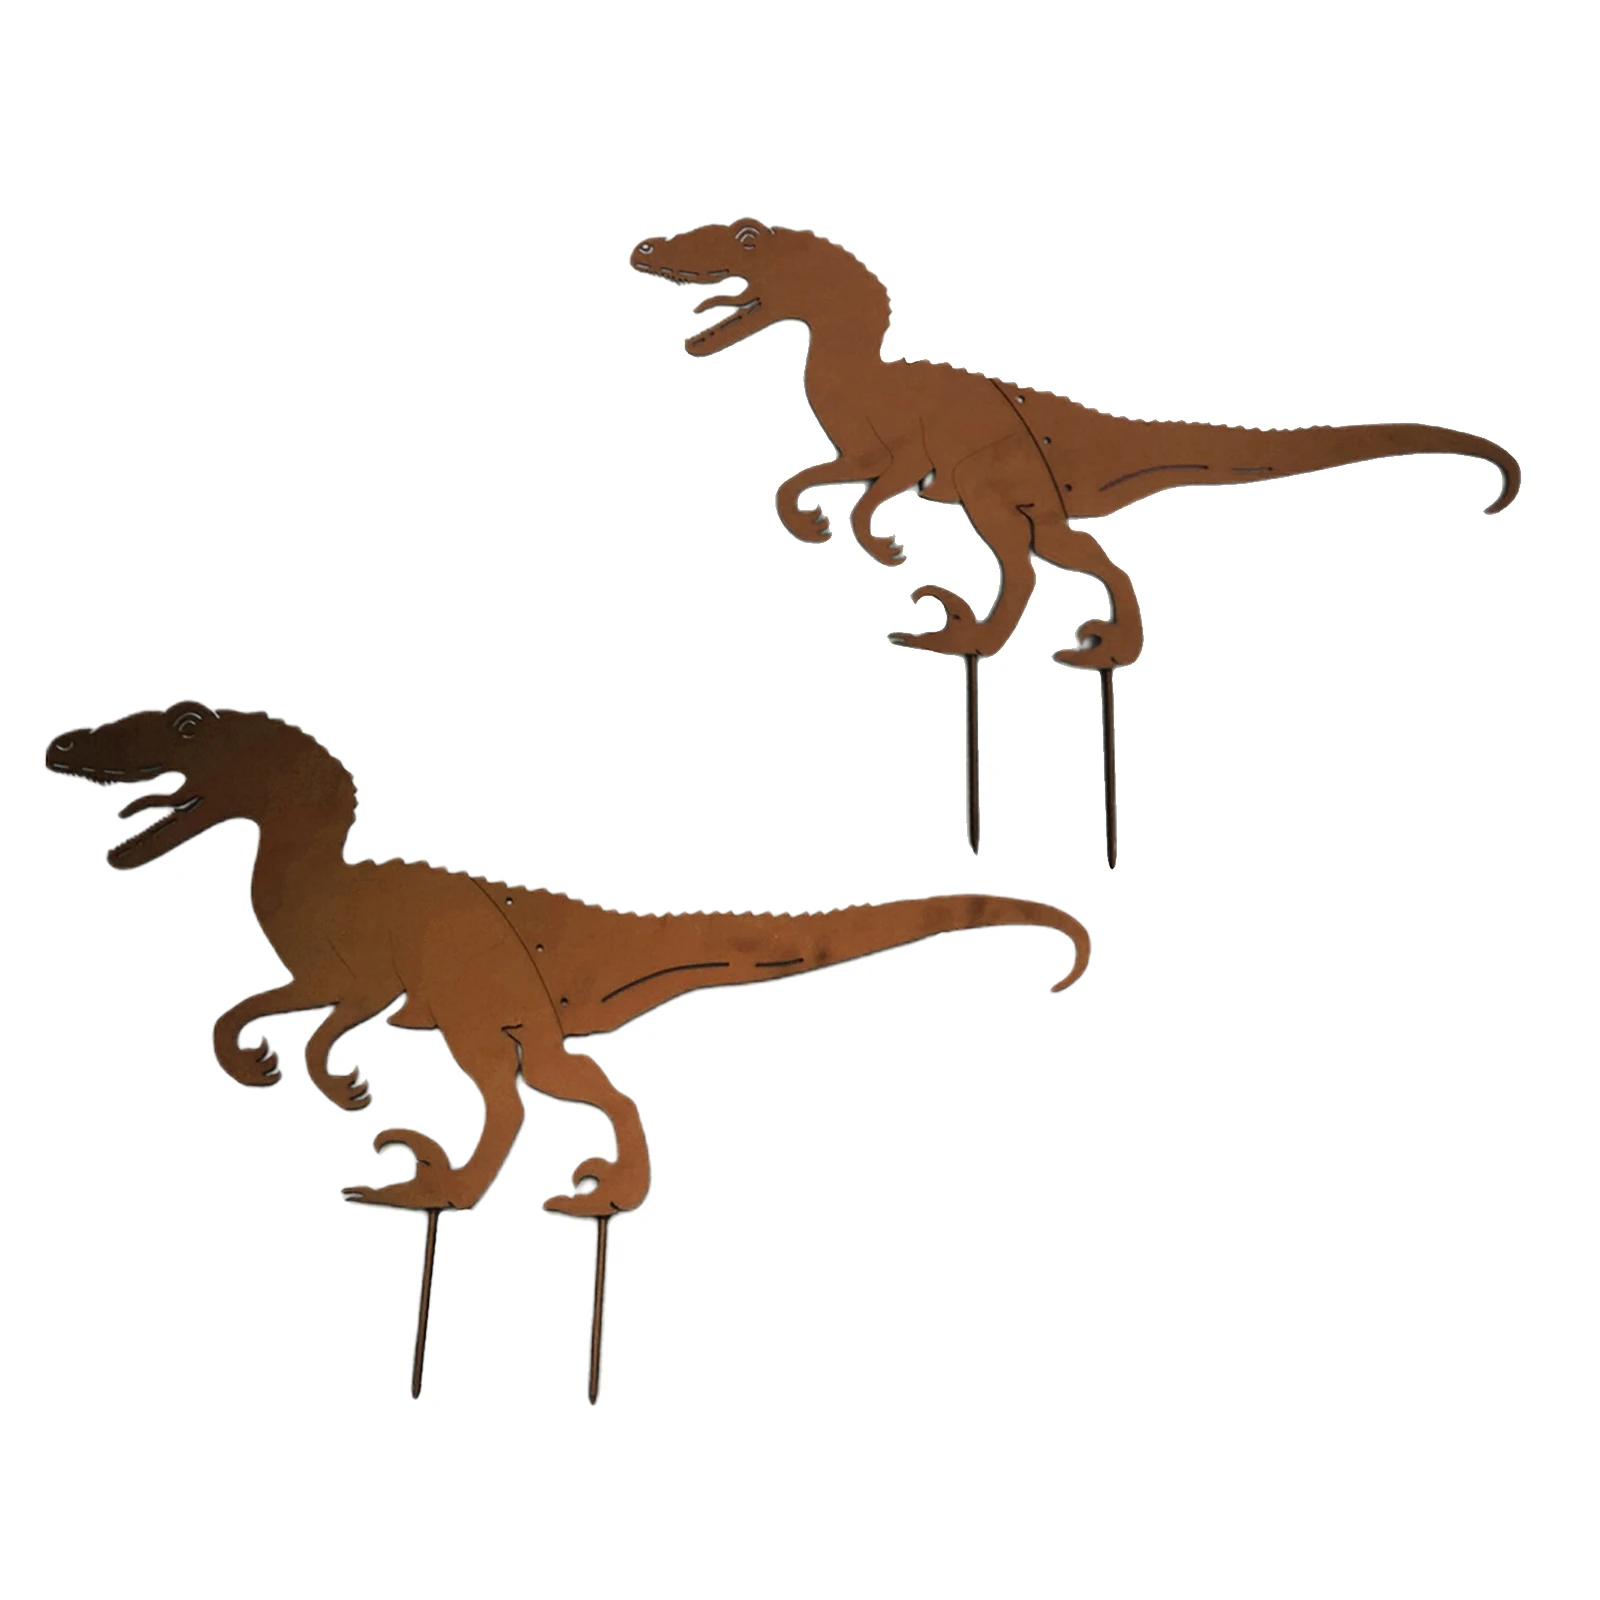 

Dinosaur Silhouette Garden Stake Garden Art for Outside Decorations Lawn Ornaments Ornamental Gardening Stakes Outdoor Statues